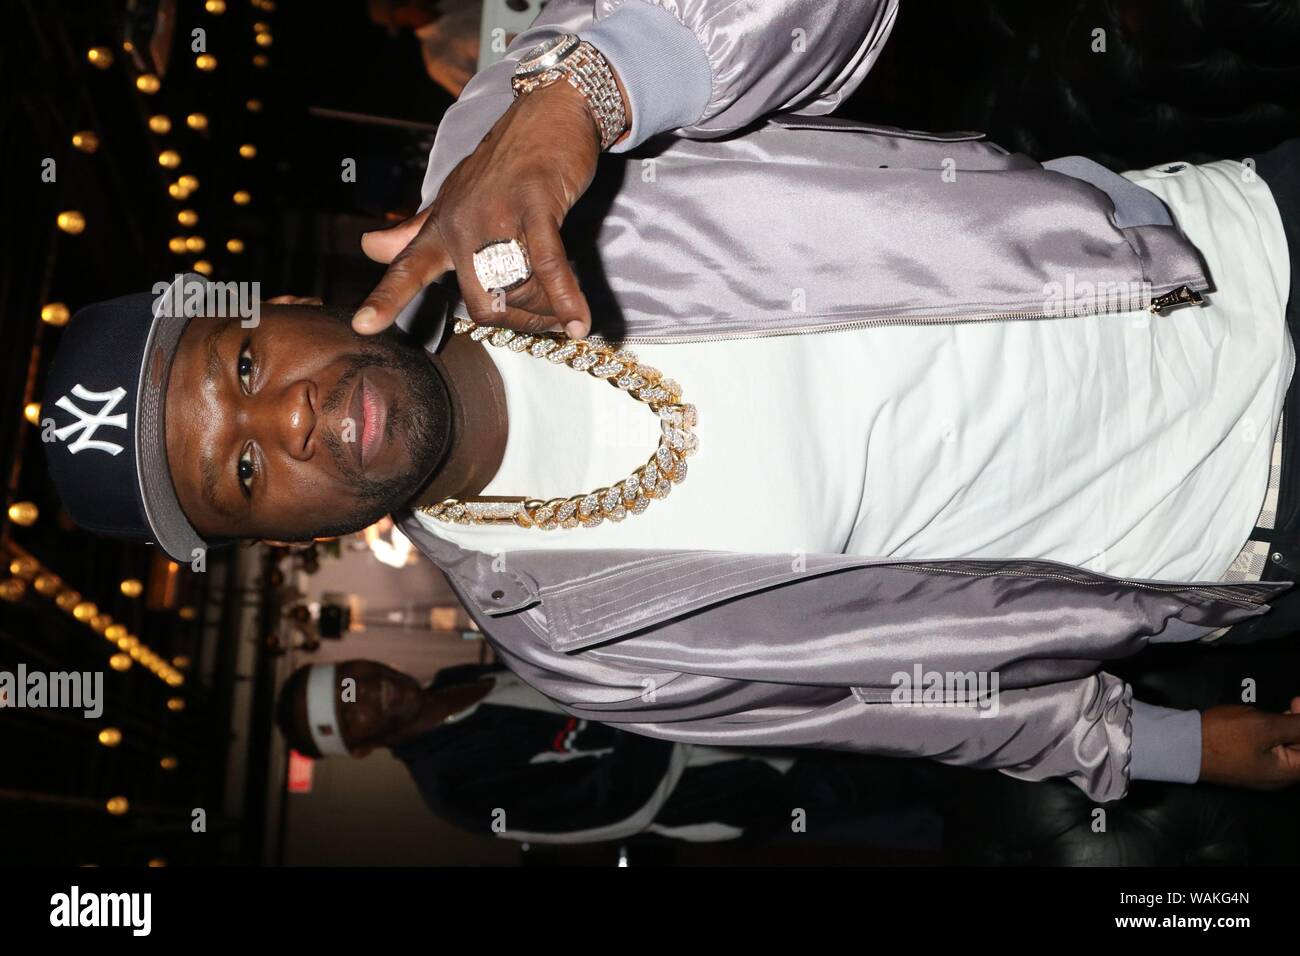 New York, NY, USA. 20th Aug, 2019. 50 Cent backstage at the Power Season 6 Premiere August 20, 2019 at Madison Square Garden in New York City. Photo Credit: Walik Goshorn/Mediapunch/Alamy Live News Stock Photo